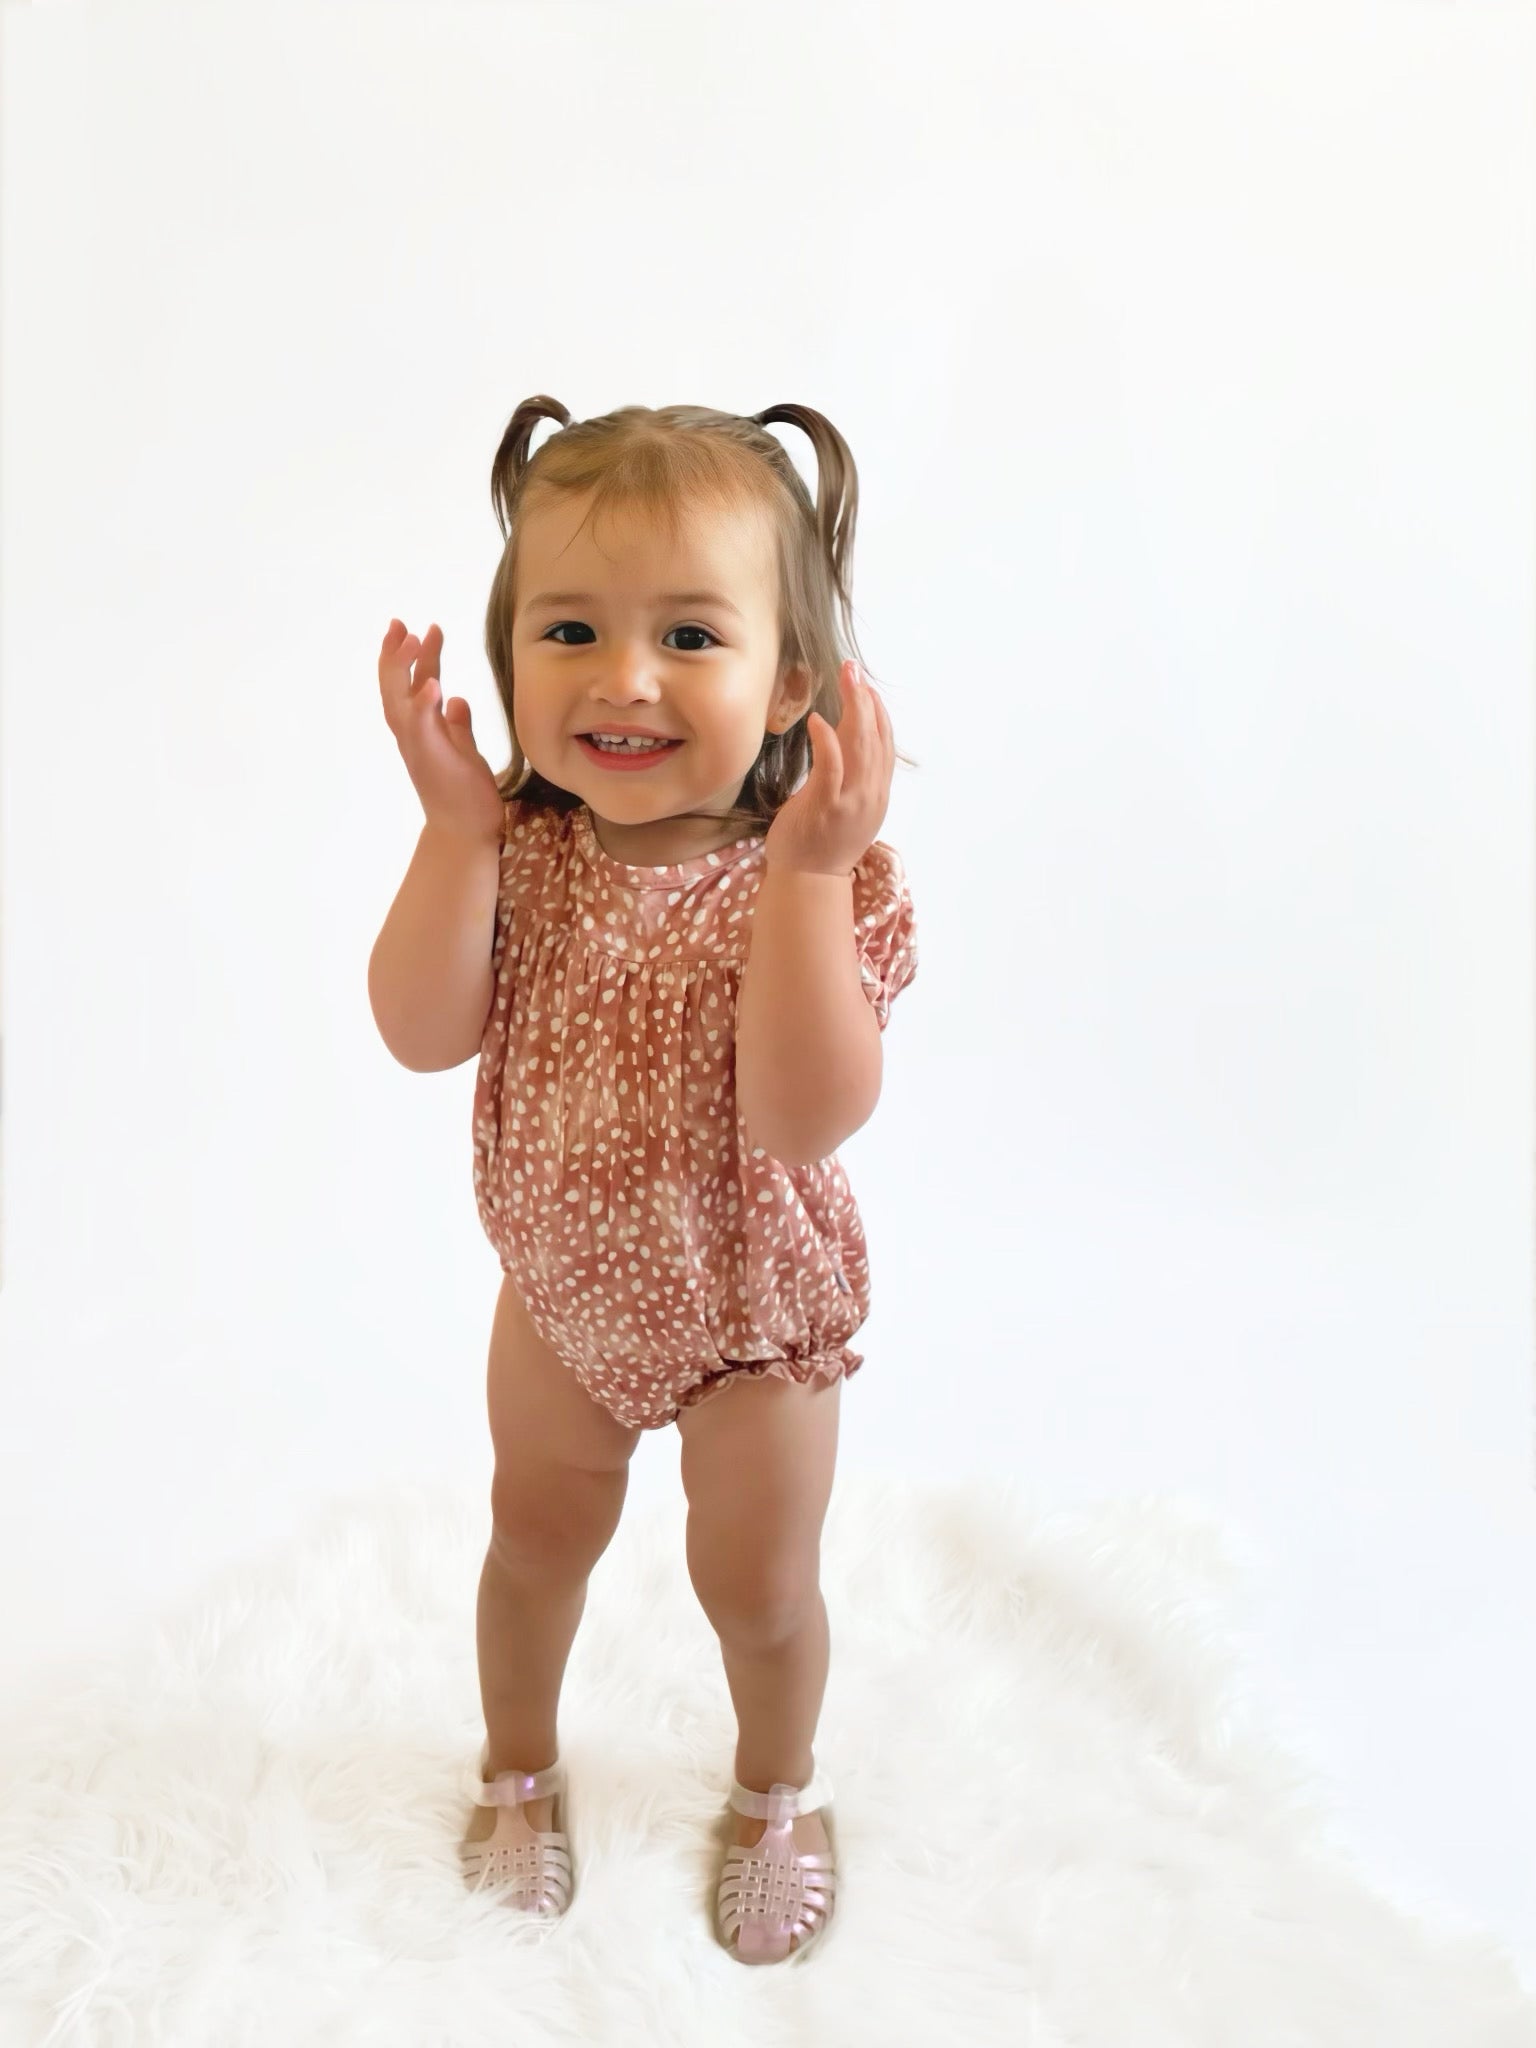 Bamboo Oh Deer! Bubble Romper